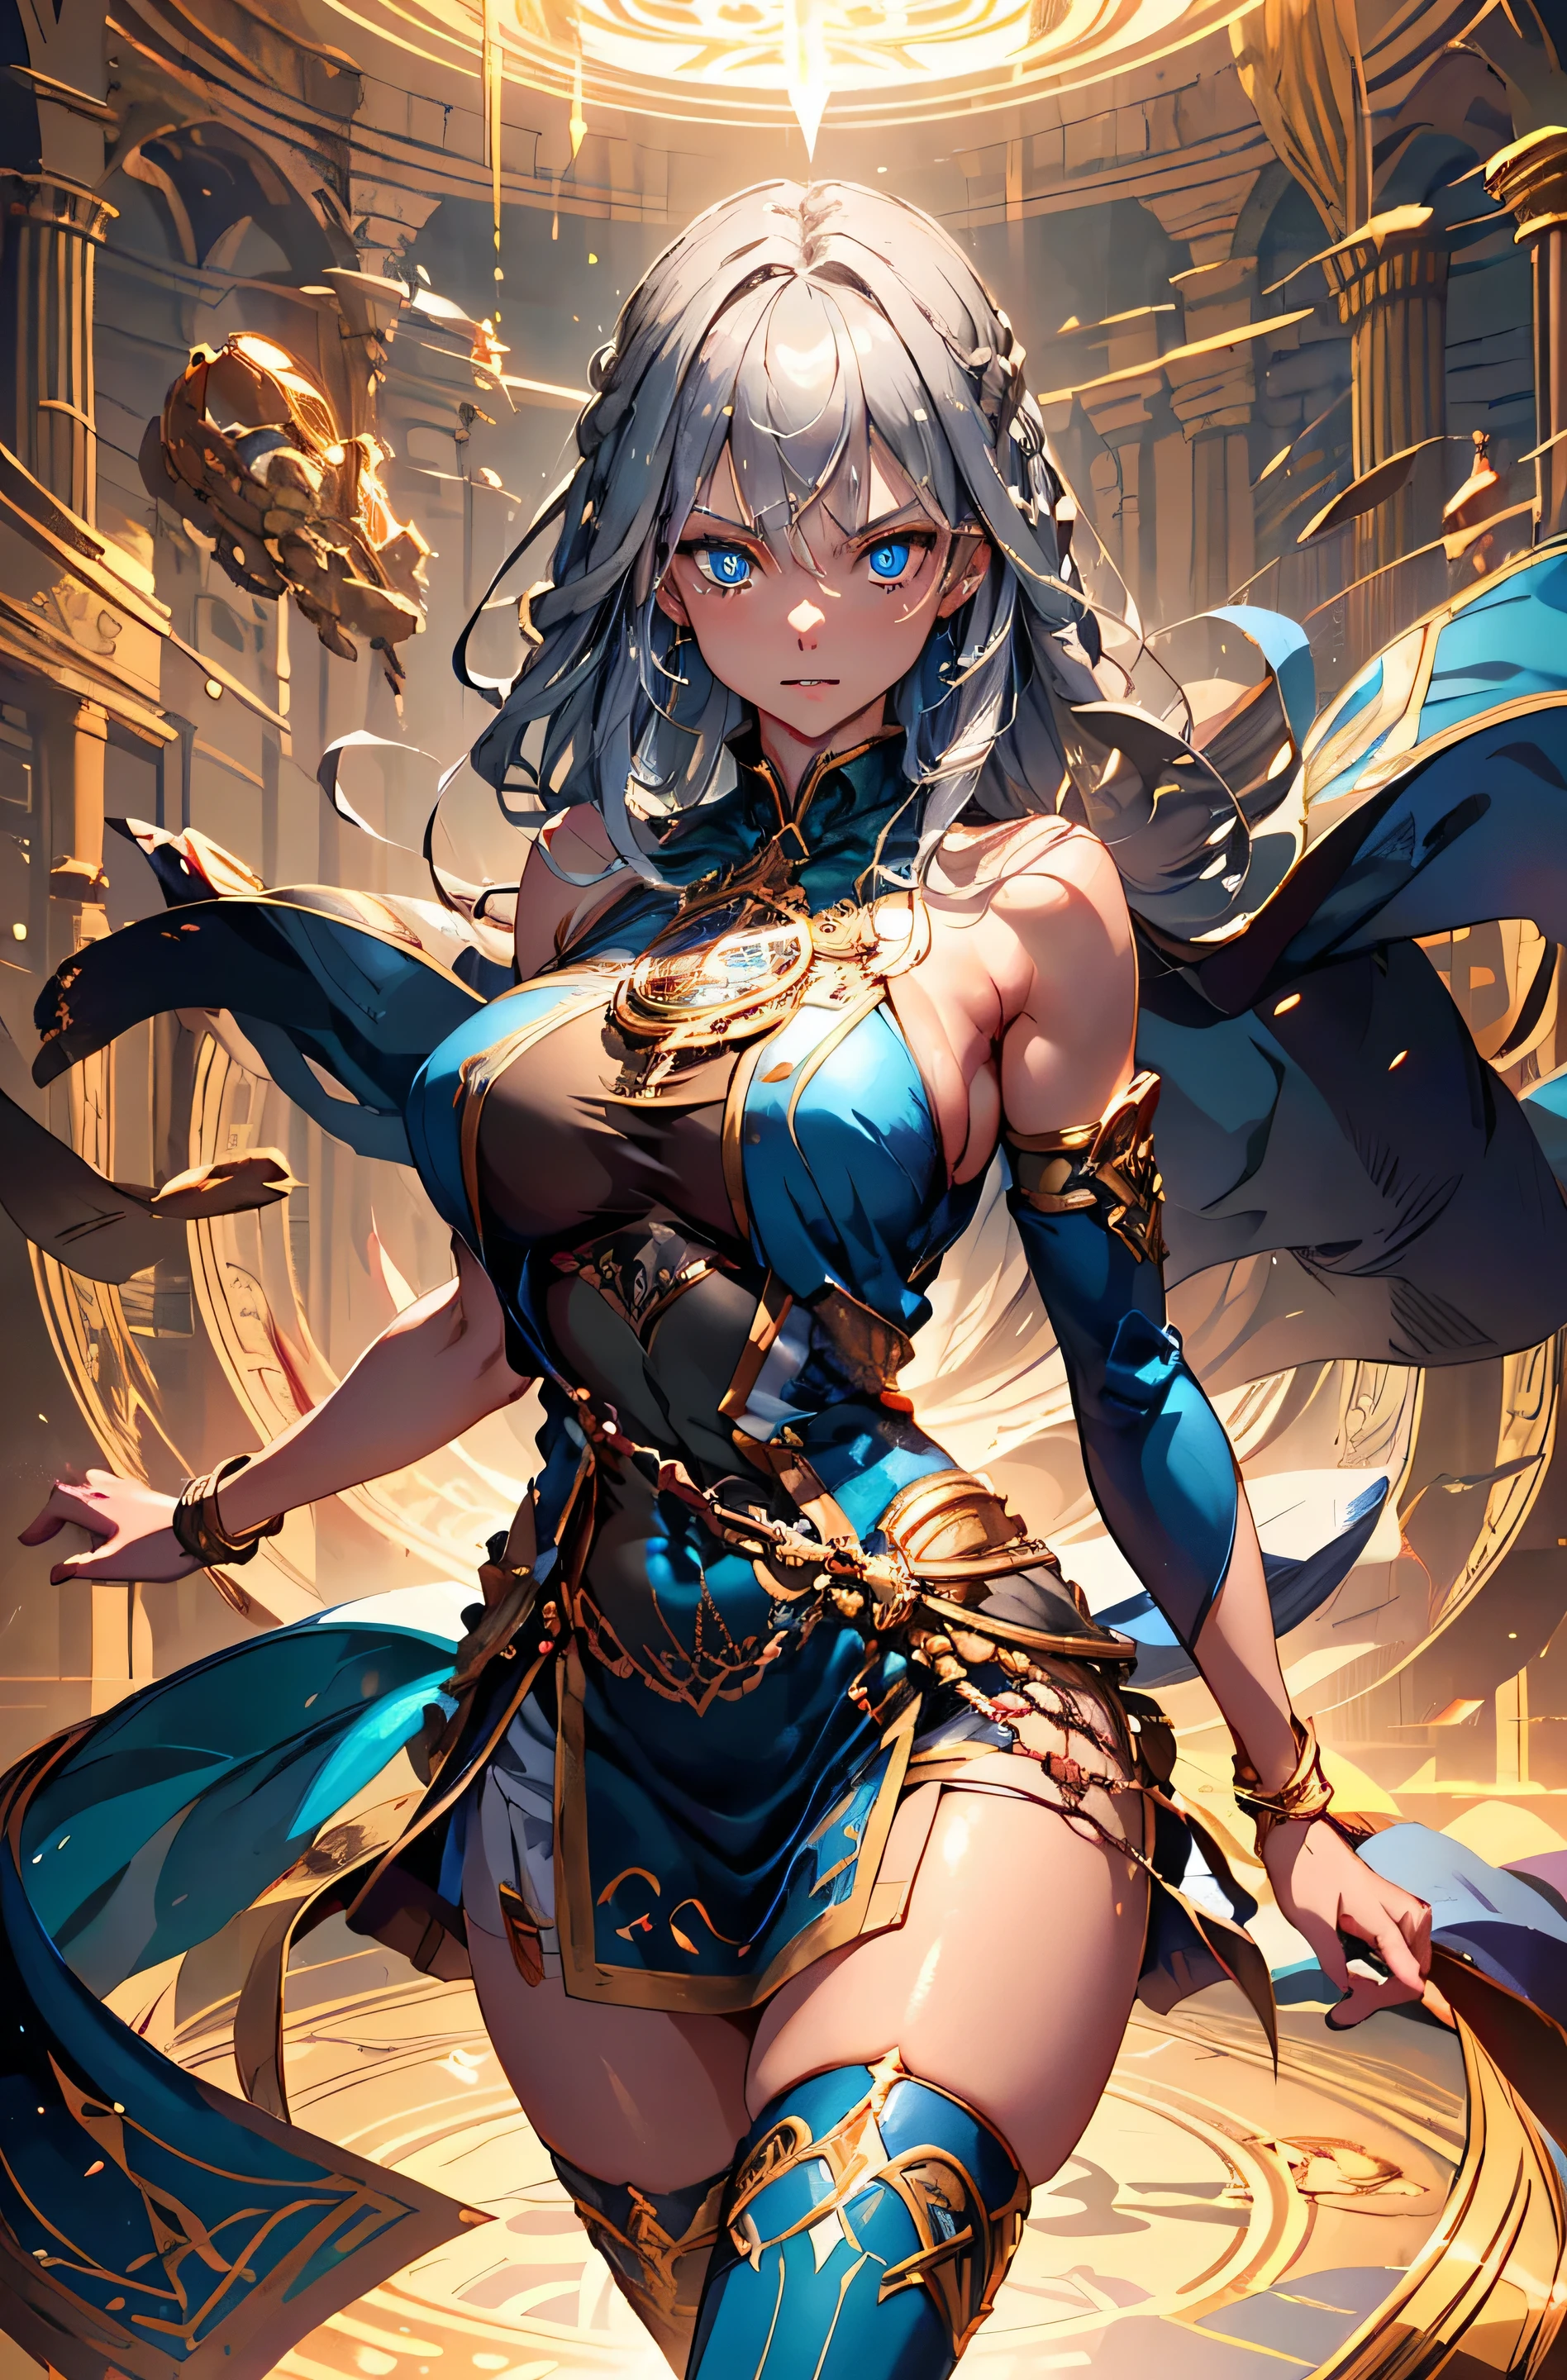 High resolution, highest quality, figure, Super detailed, (Detailed face), (Fine grain), Cinema Lighting, highest quality, Super detailed, masterpiece, One girl, alone, Long Hair, silver hair with blue stripes, blue eyes, (Long blue female knight dress), breastplate, No sleeve, Bare shoulders, white hand socks, Decorative Gold Bracelets, White Skirt, Black knee-high socks, Remains, Serious expression, Glowing Eyes, Big Breasts, light, (colorful), From head to thighs, magic circle, exquisite fantasy costume design, Dynamic Angle, Dynamic pose